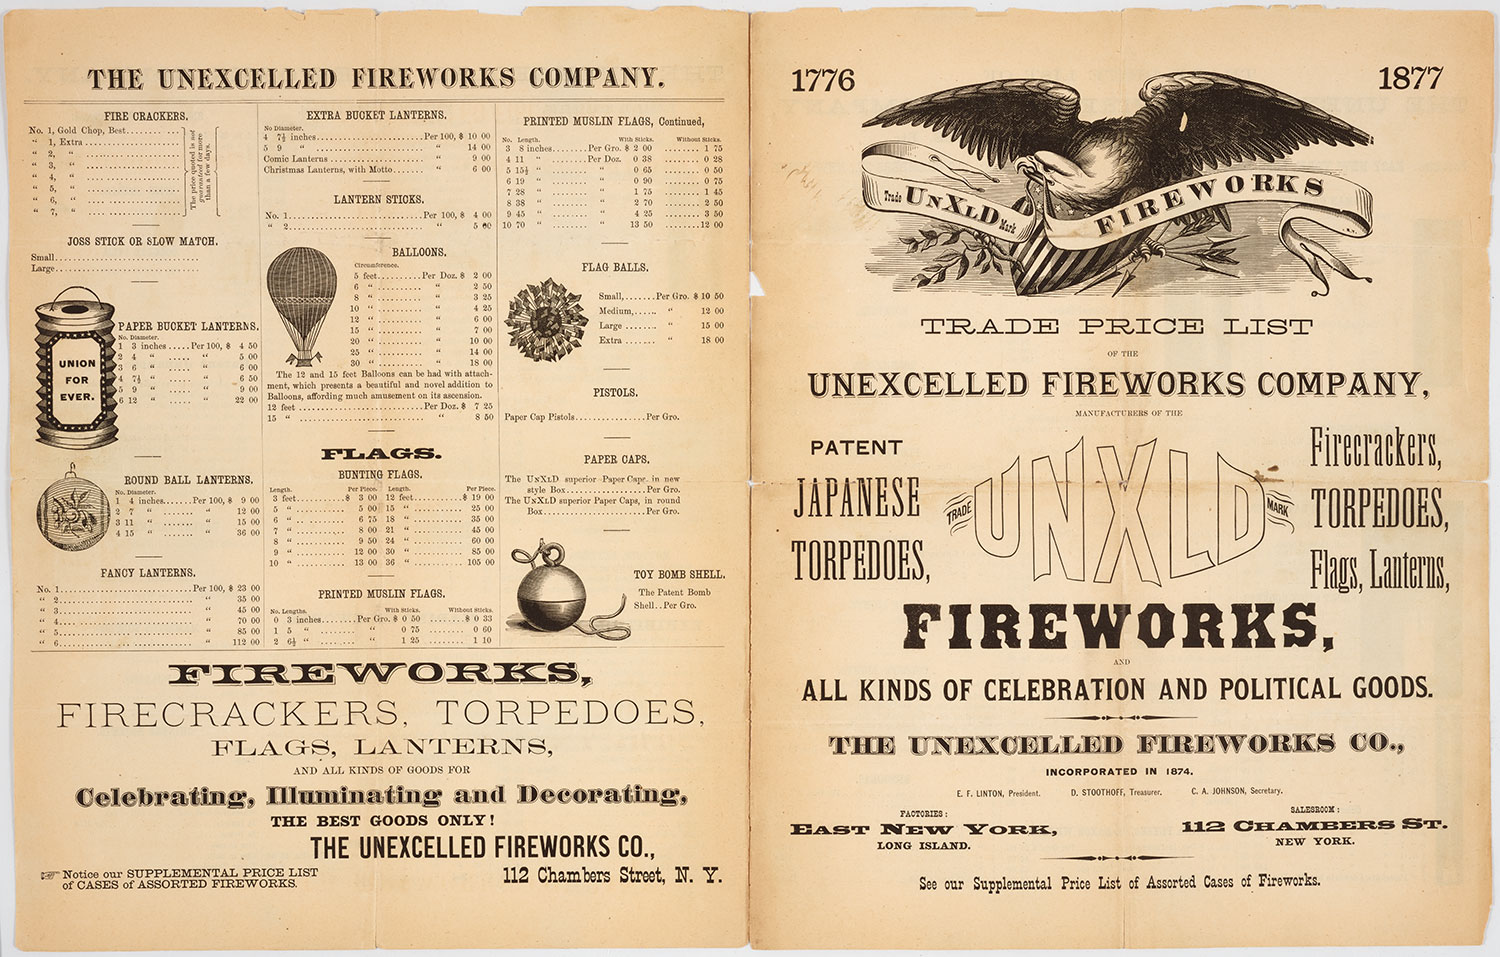 Price list for fireworks in 1877